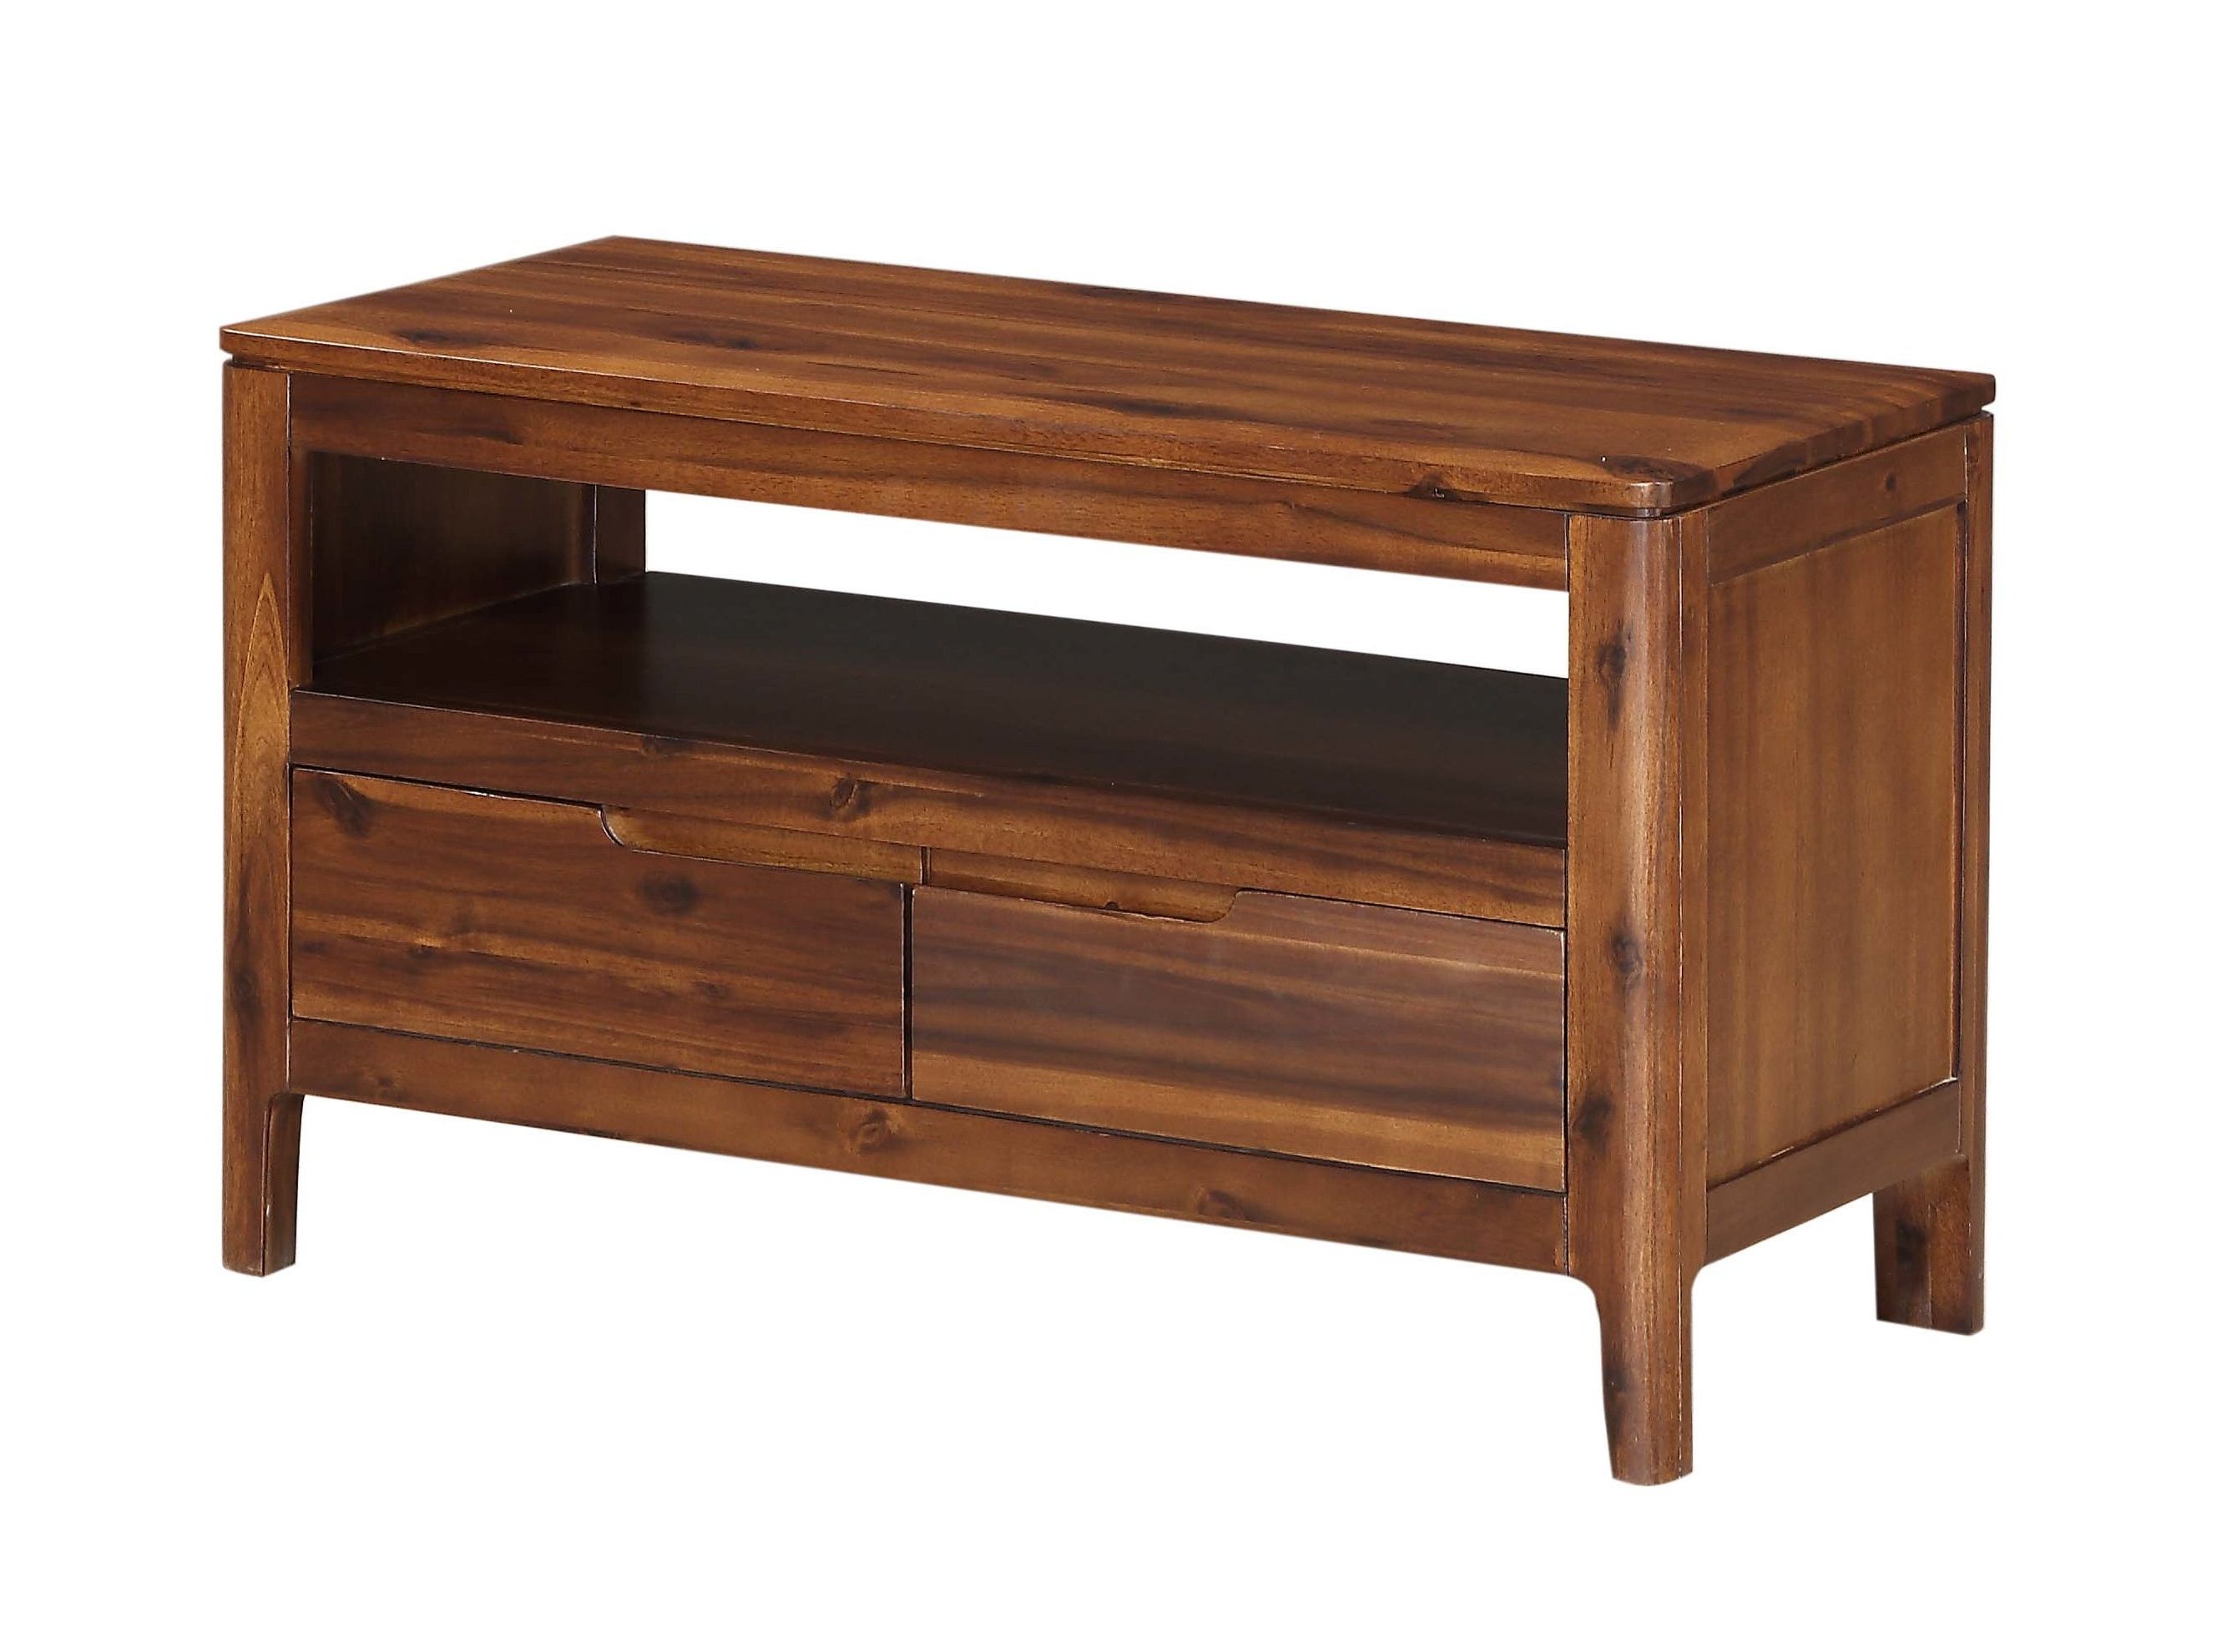 Acacia Tv Stands & Entertainment Units You'll Love | Wayfair.co (View 6 of 20)